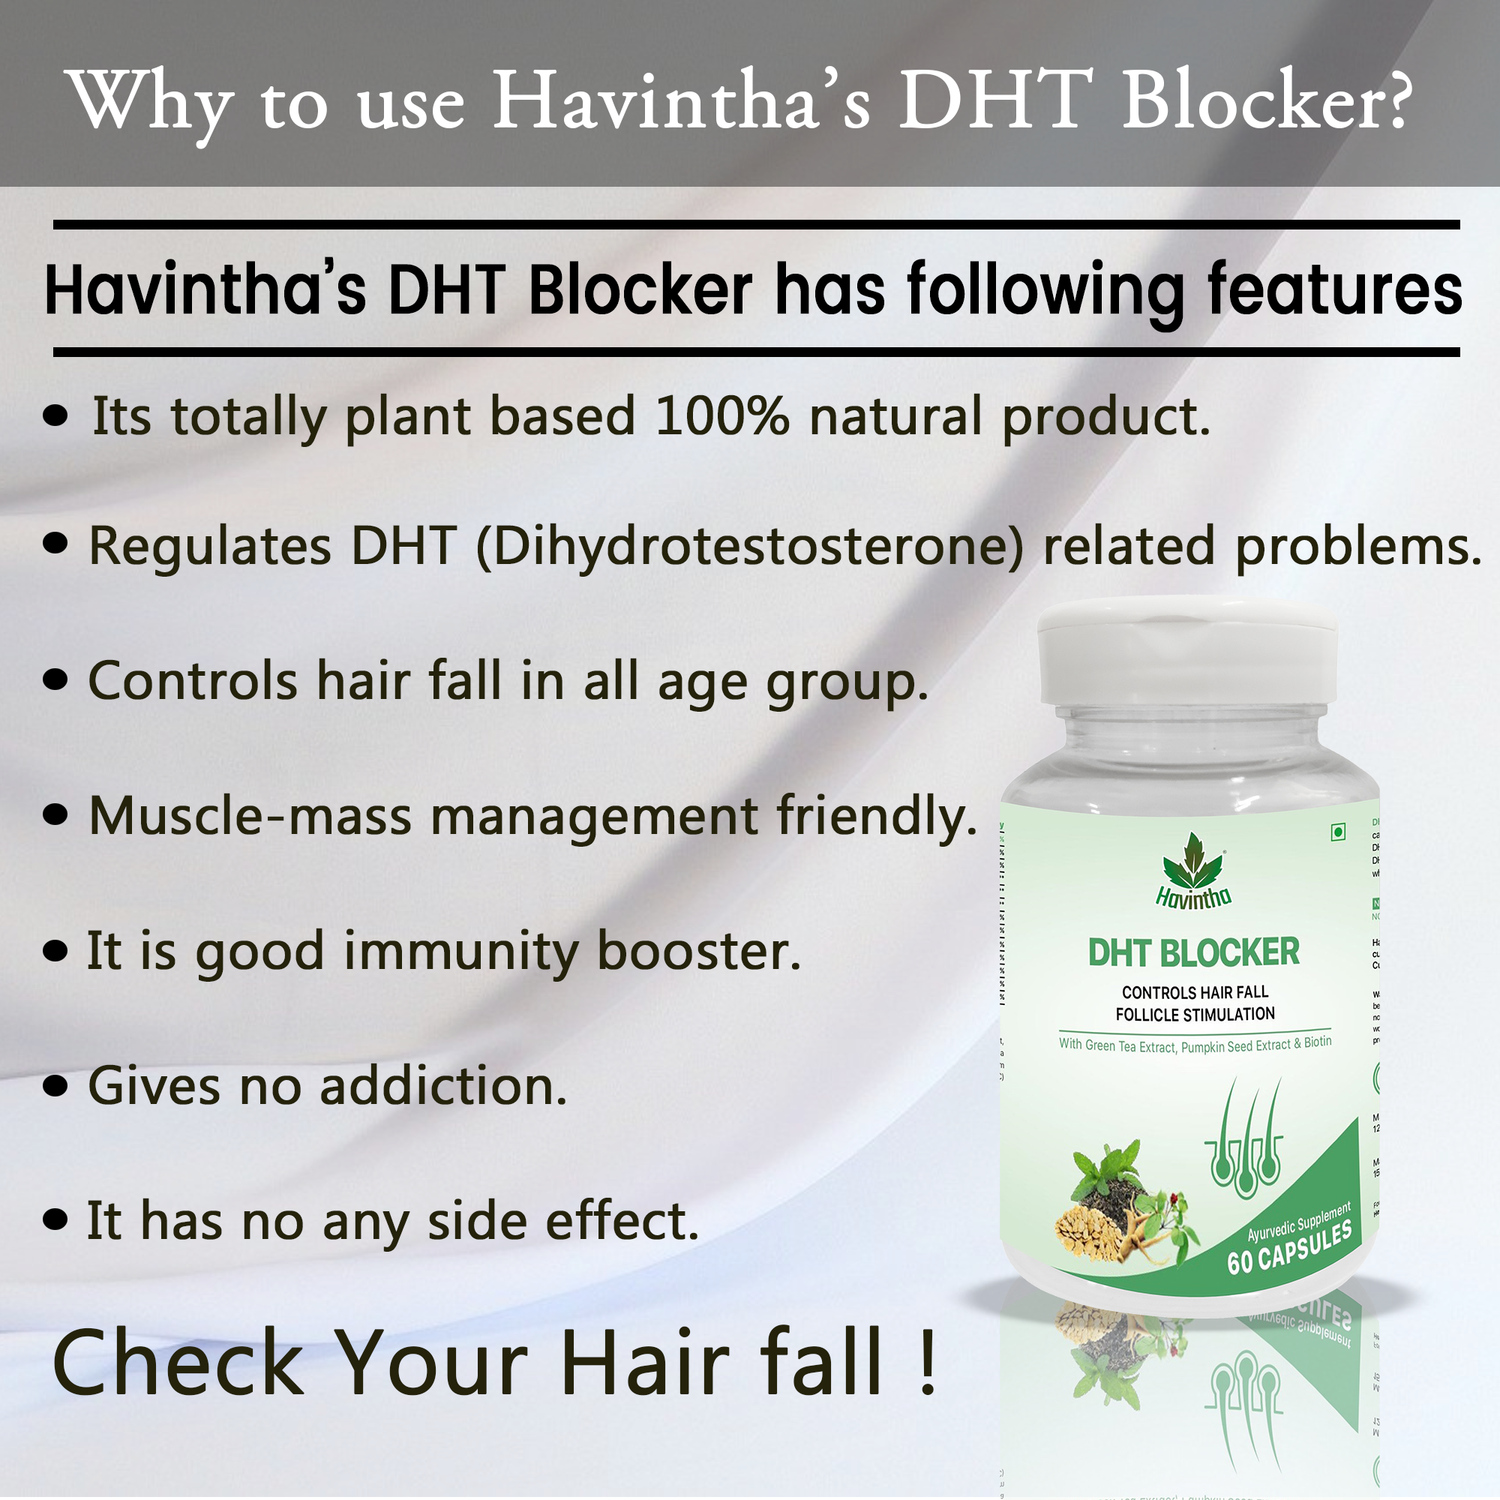 Plant Based DHT BLOCKER with Ginseng Extract, Green Tea &amp; Biotin For Hair fall Control - 60 Capsules.